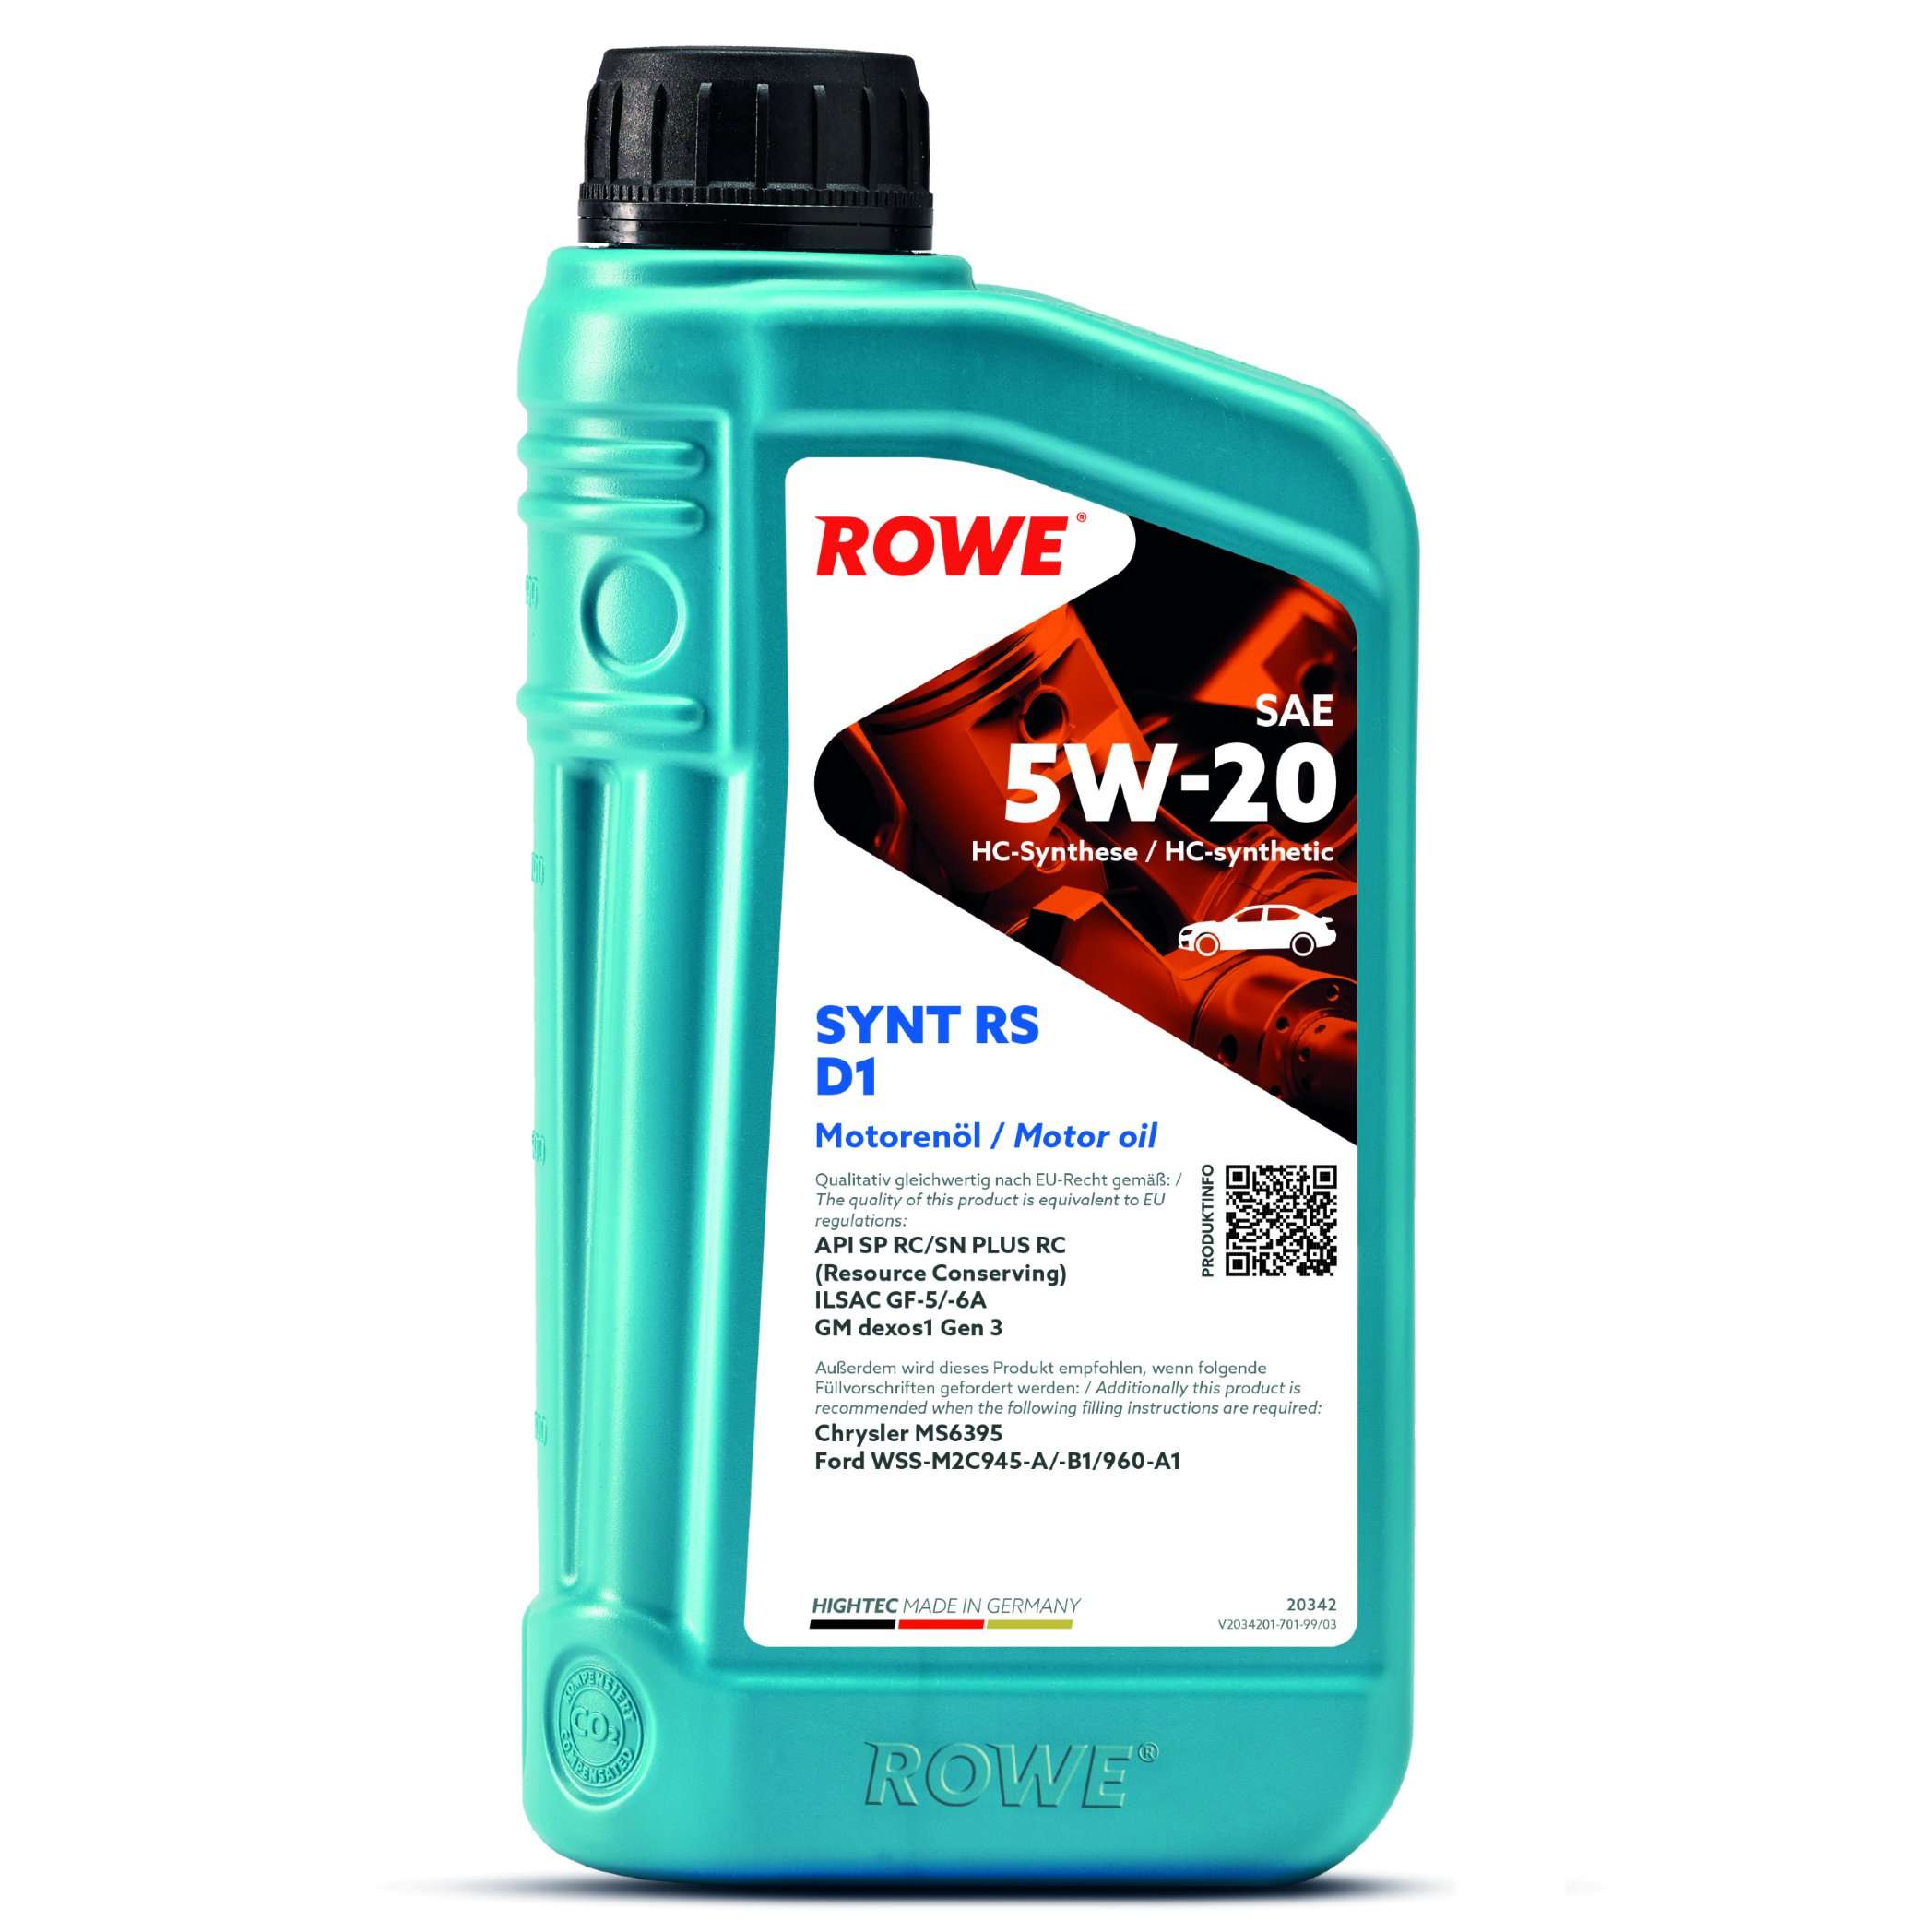 Моторное масло ROWE Synt RS D1 5W-20 1 л, 20342-0010-99